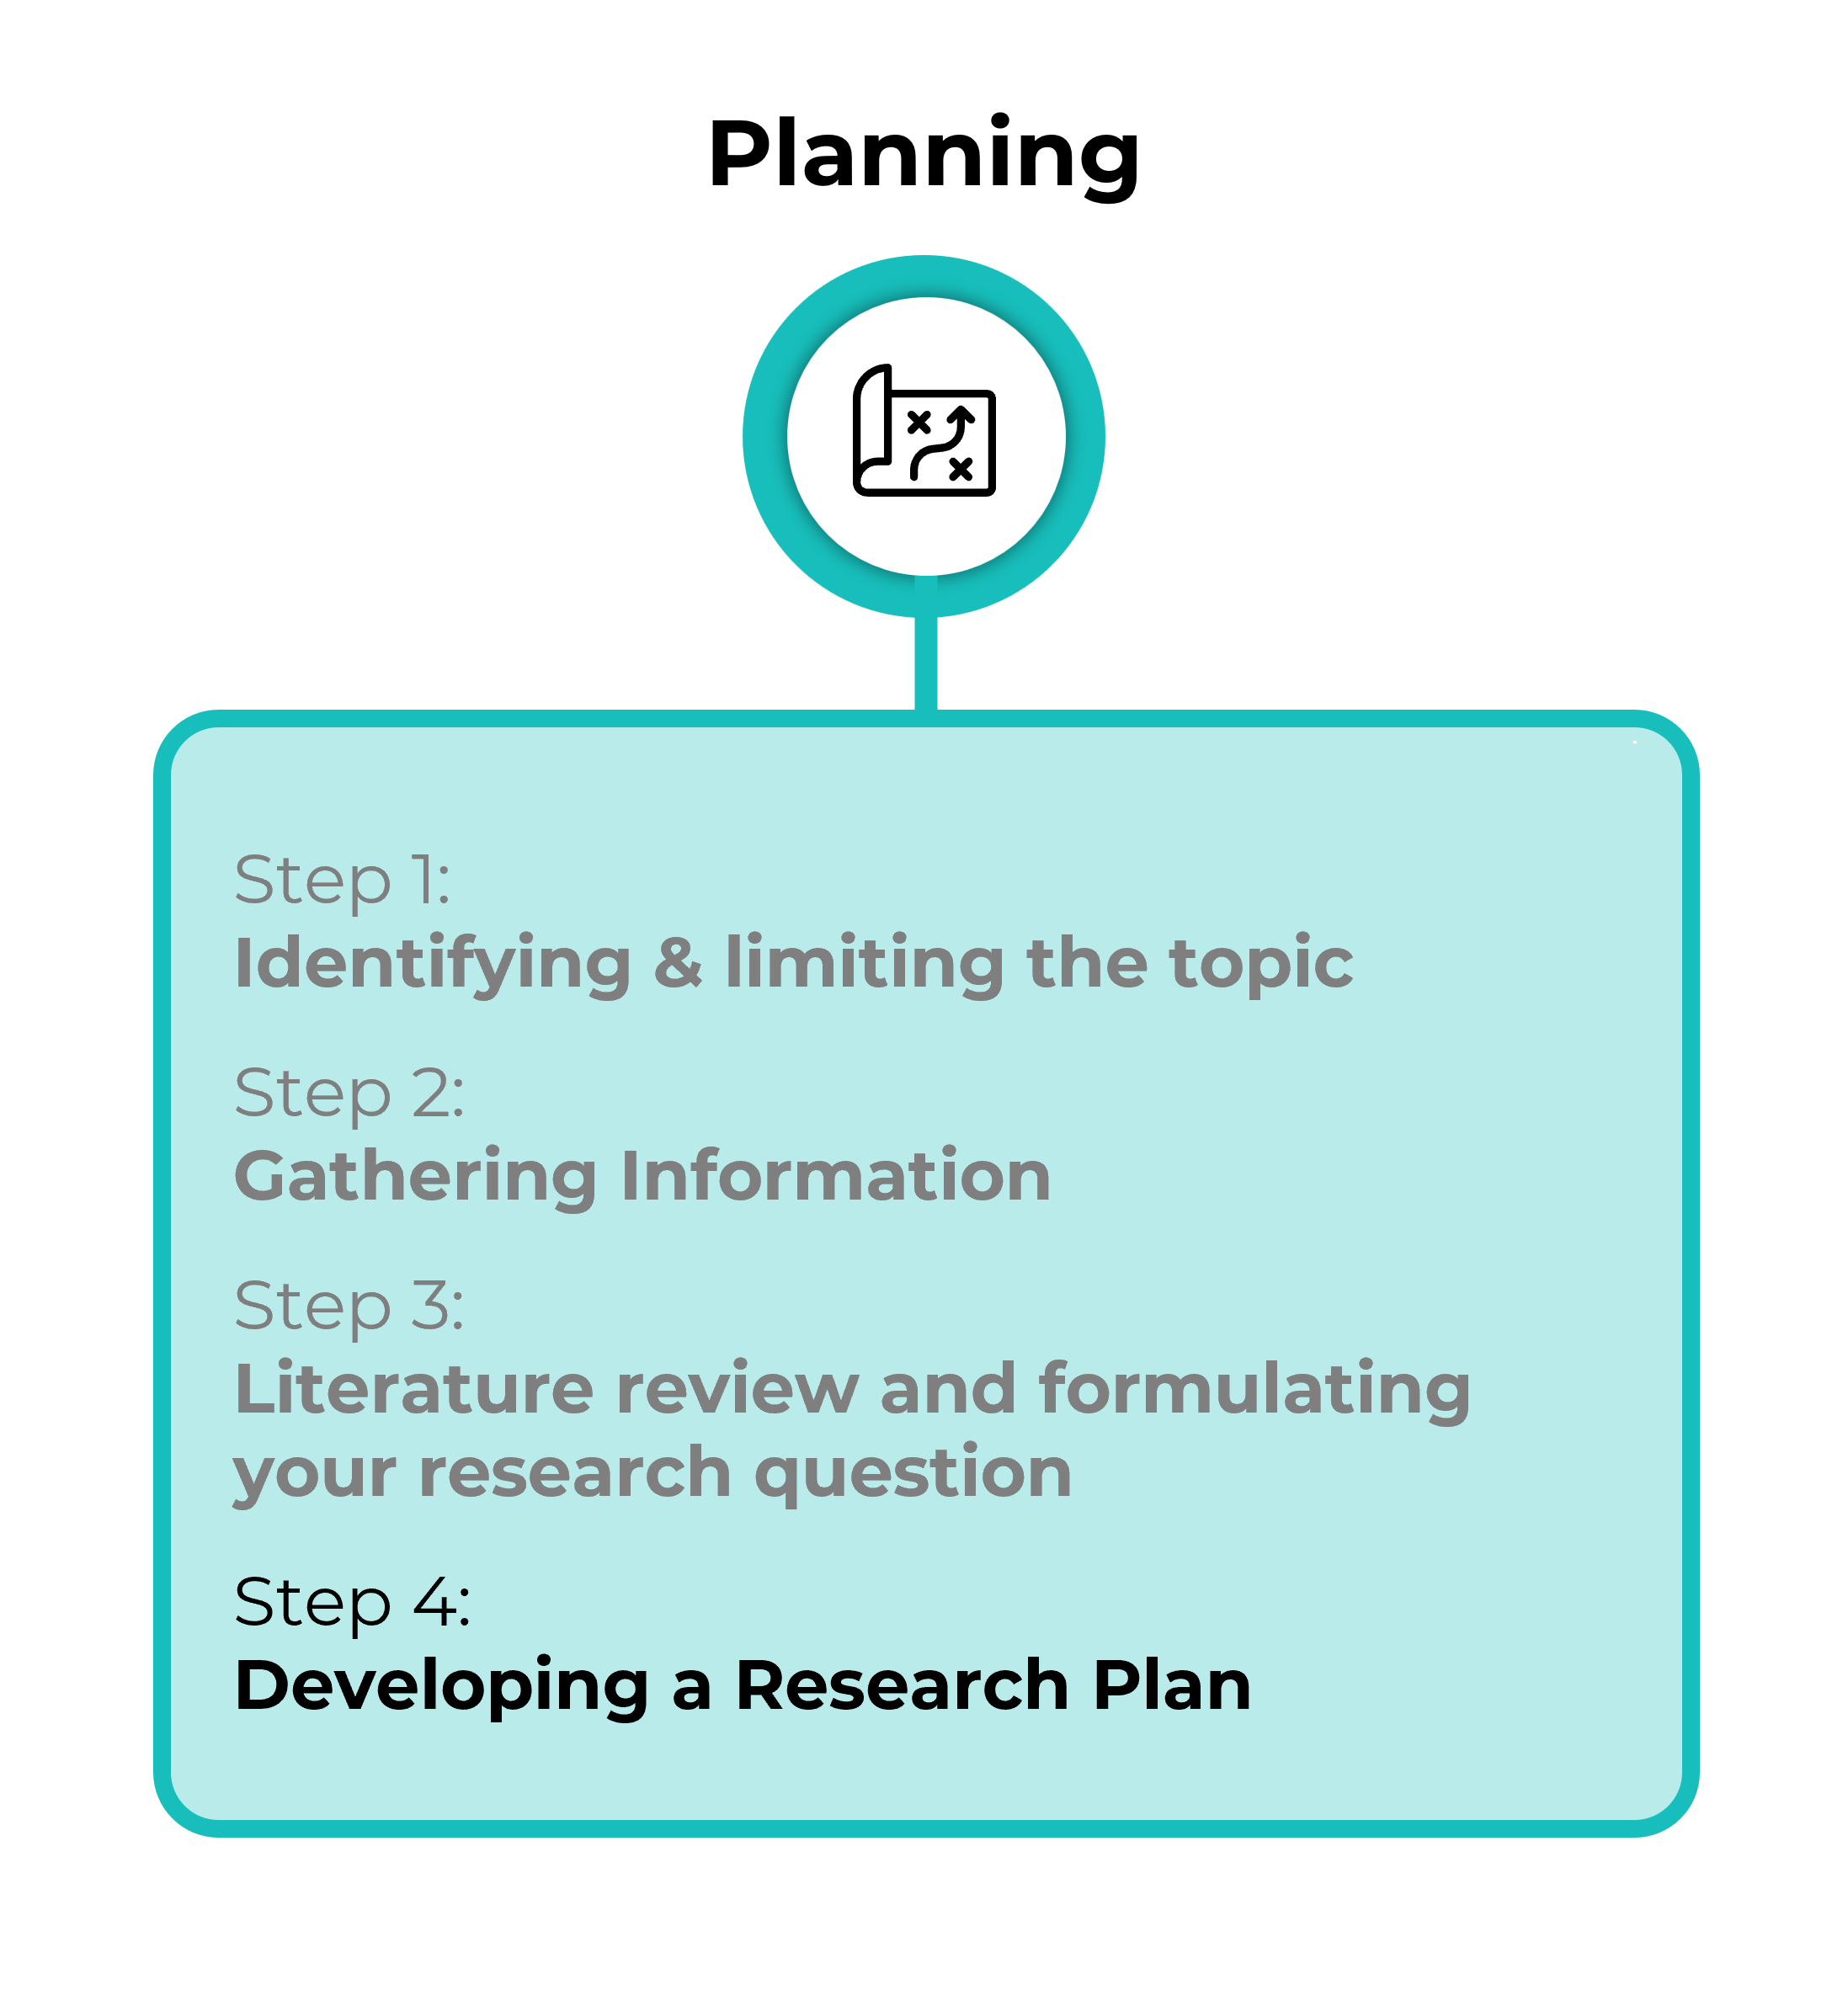 The steps of the Planning process with the 4th step hightlighted